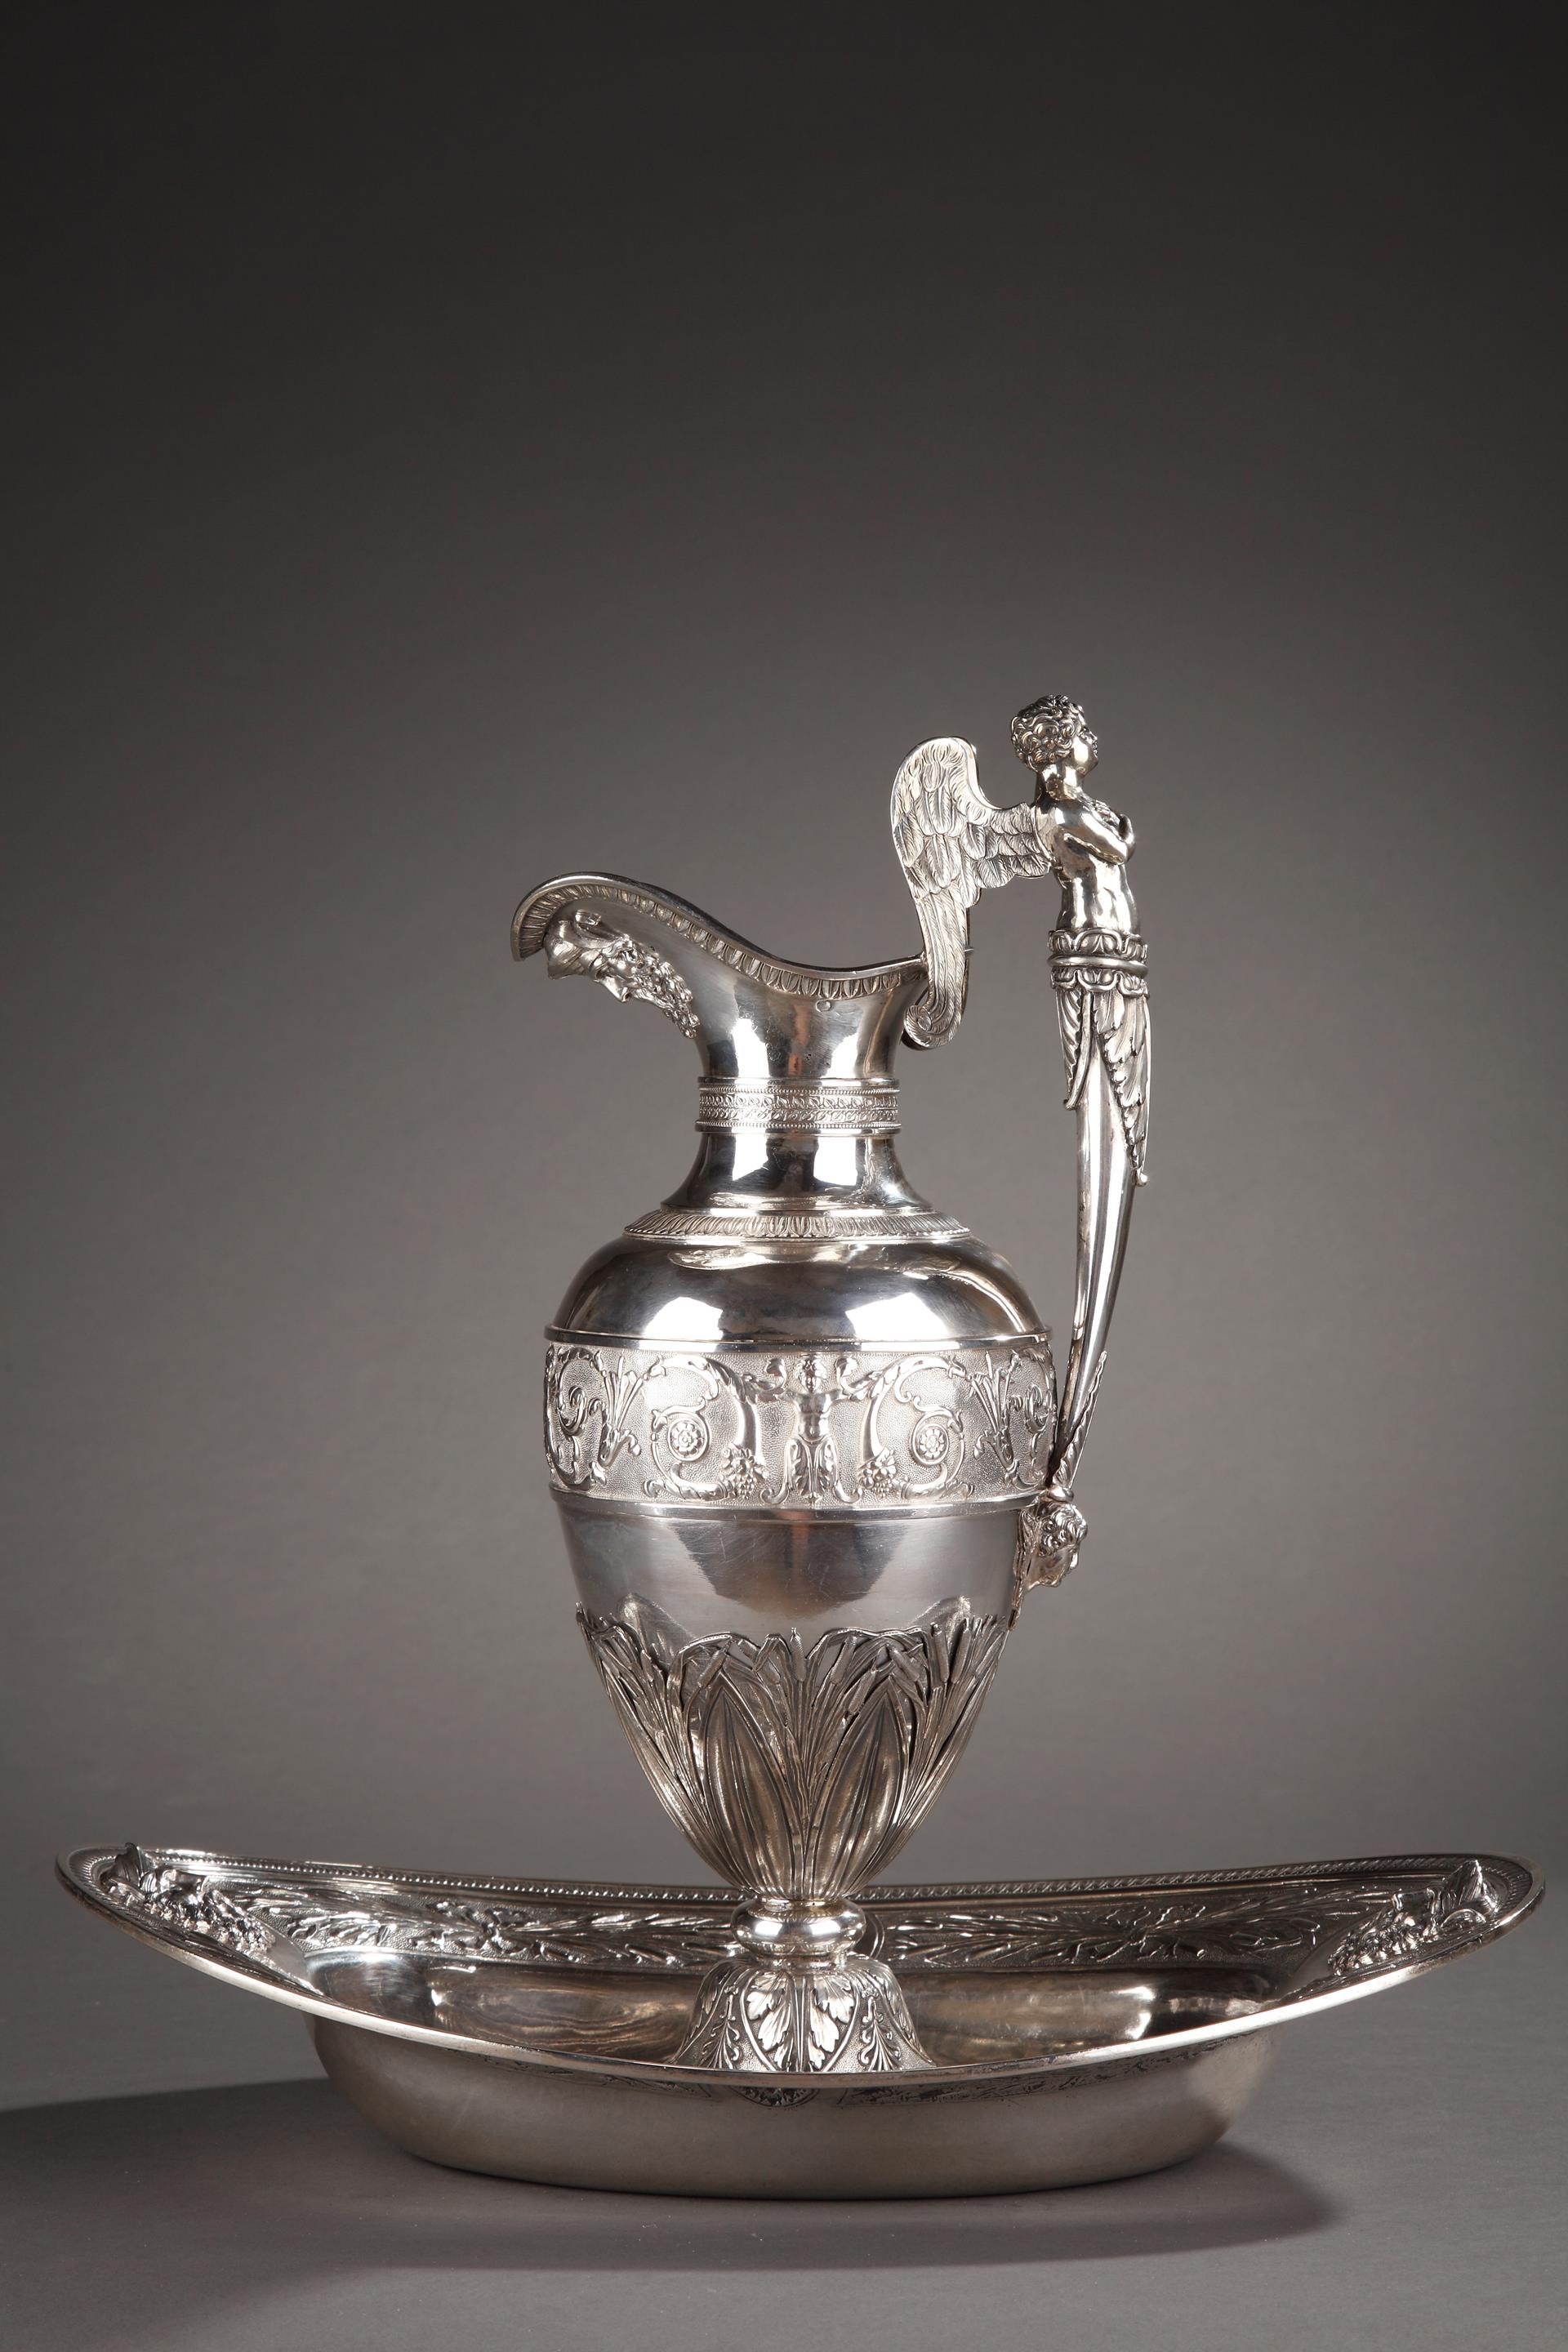 EMPIRE SILVER EWER WITH ITS BOWL BY EDME GELEZ.